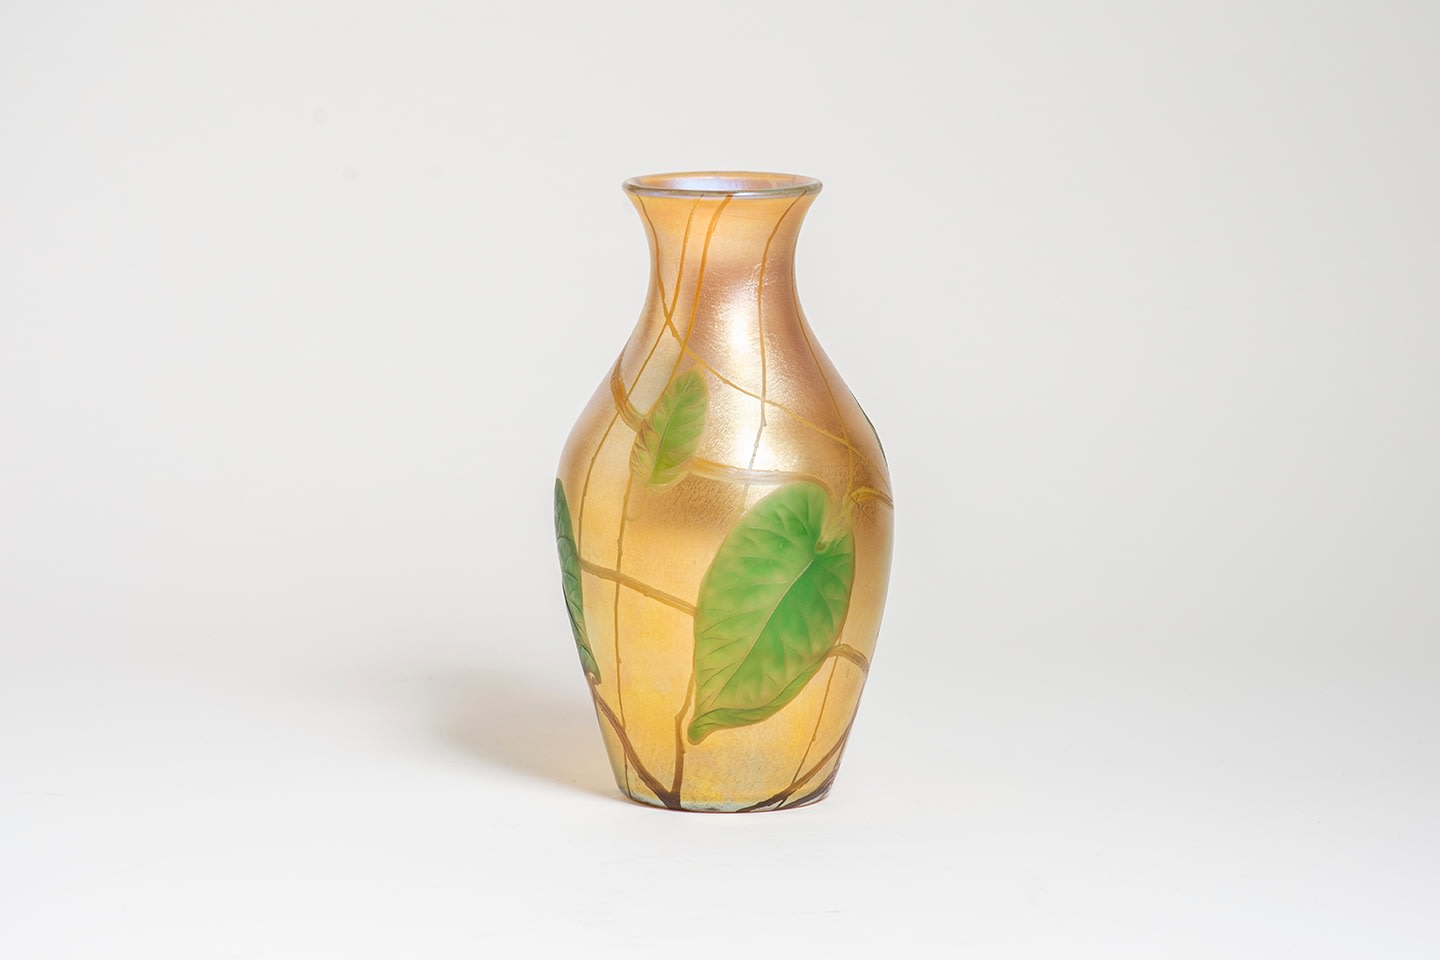 a baluster form vase in gold iridescent Tiffany Glass, decorated with a motif of swirling vines and heart-shaped leaves in green glass which have been wheel-carved to have additional decoration of veins and thorns